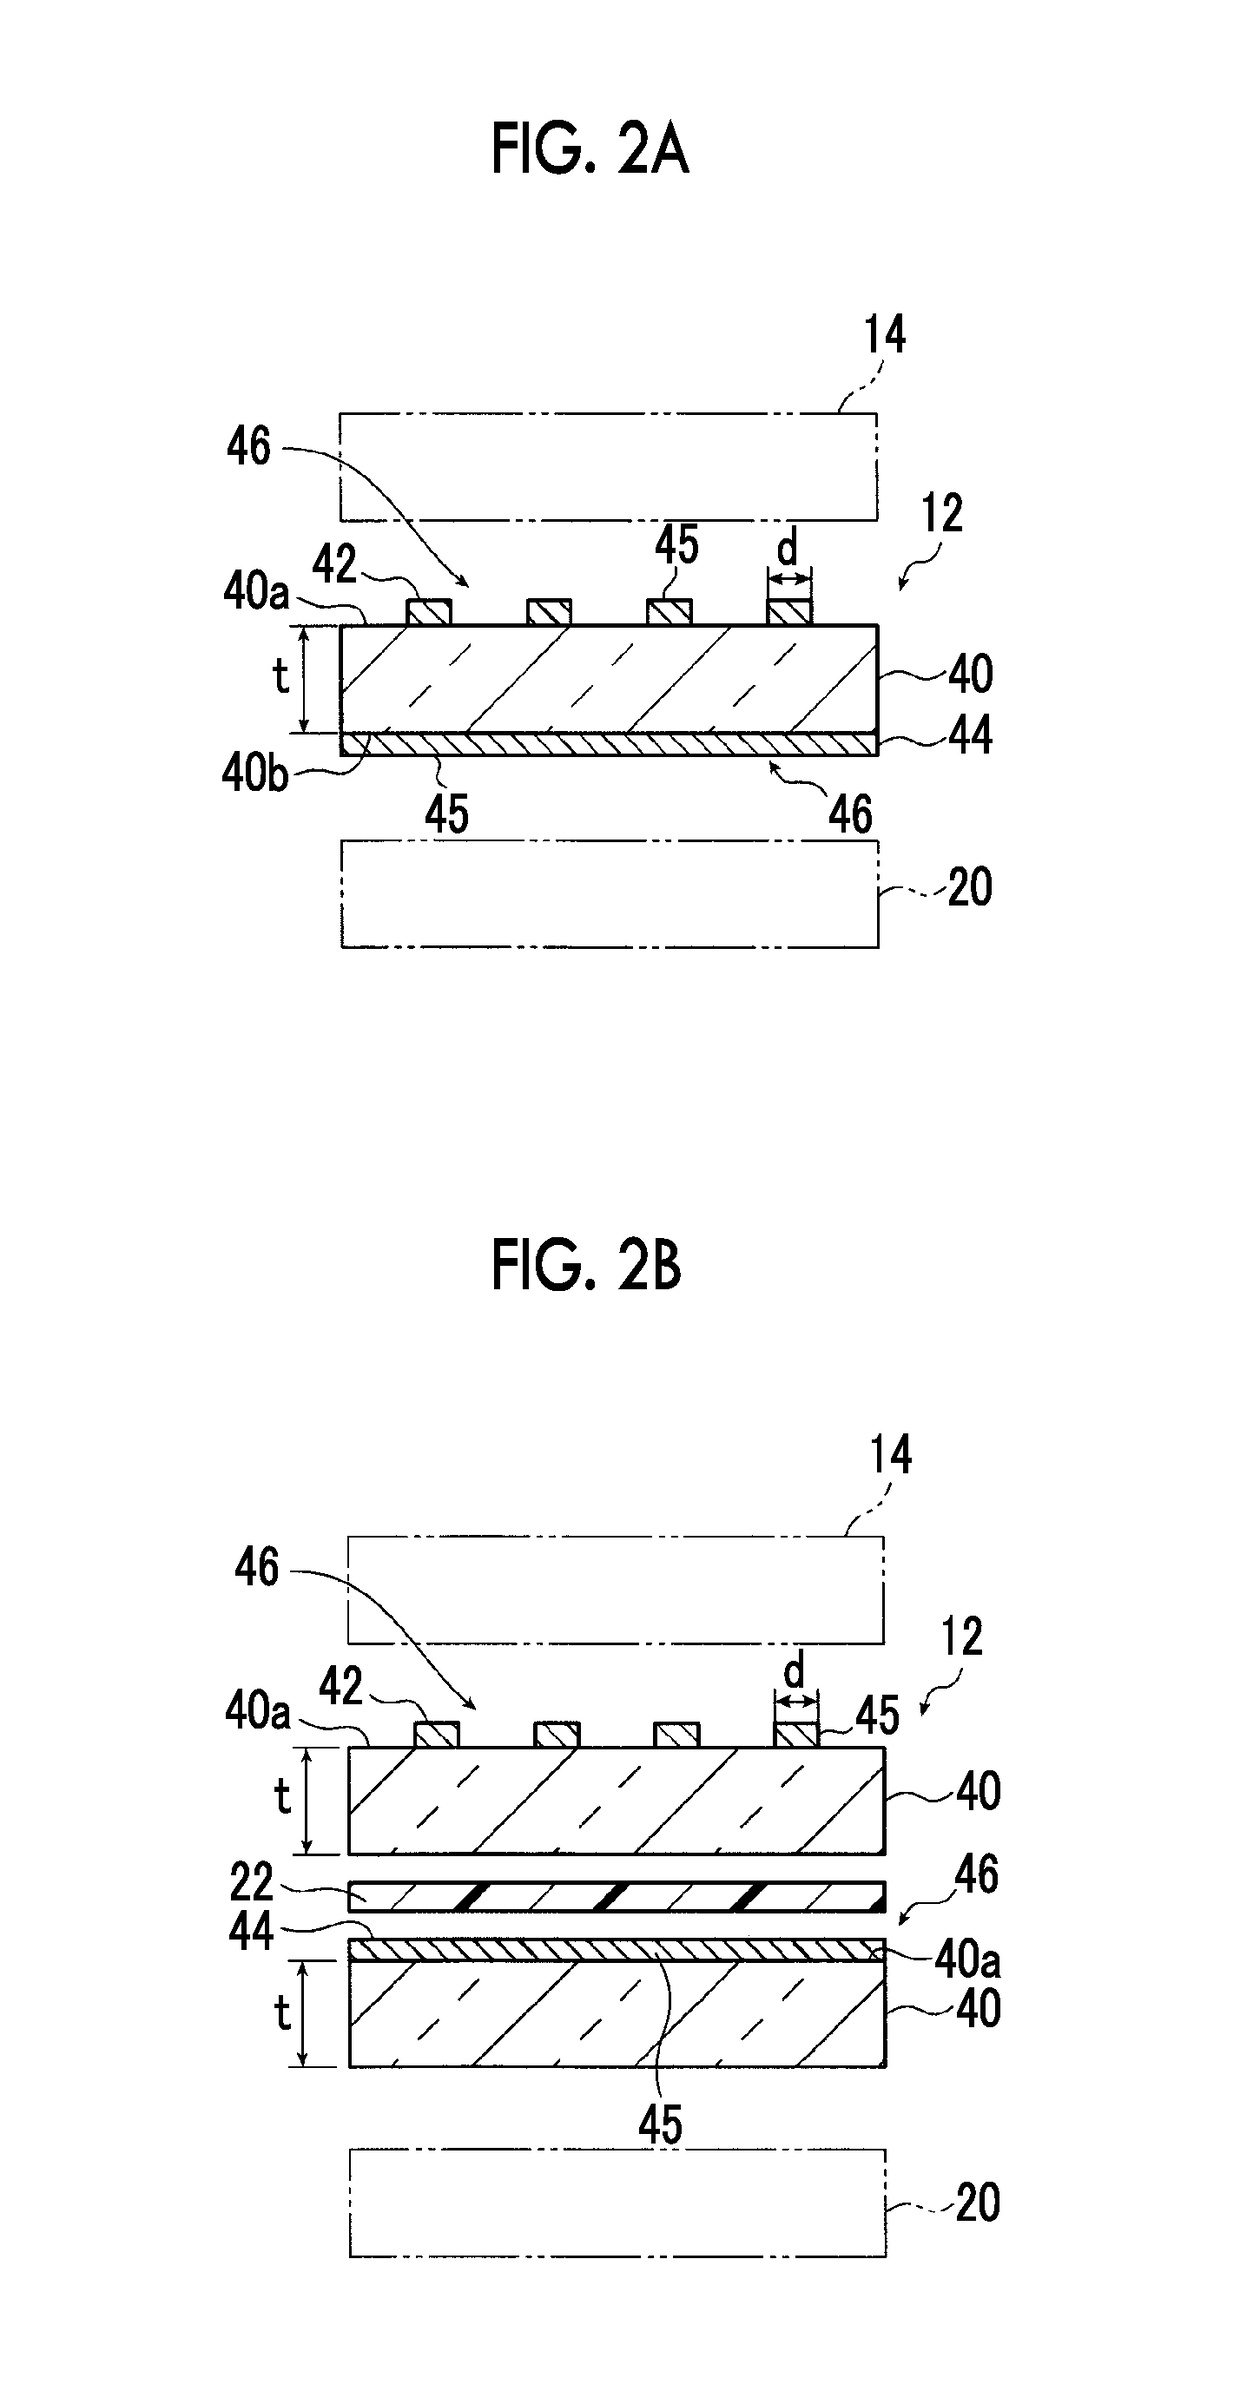 Touch panel module and electronic apparatus